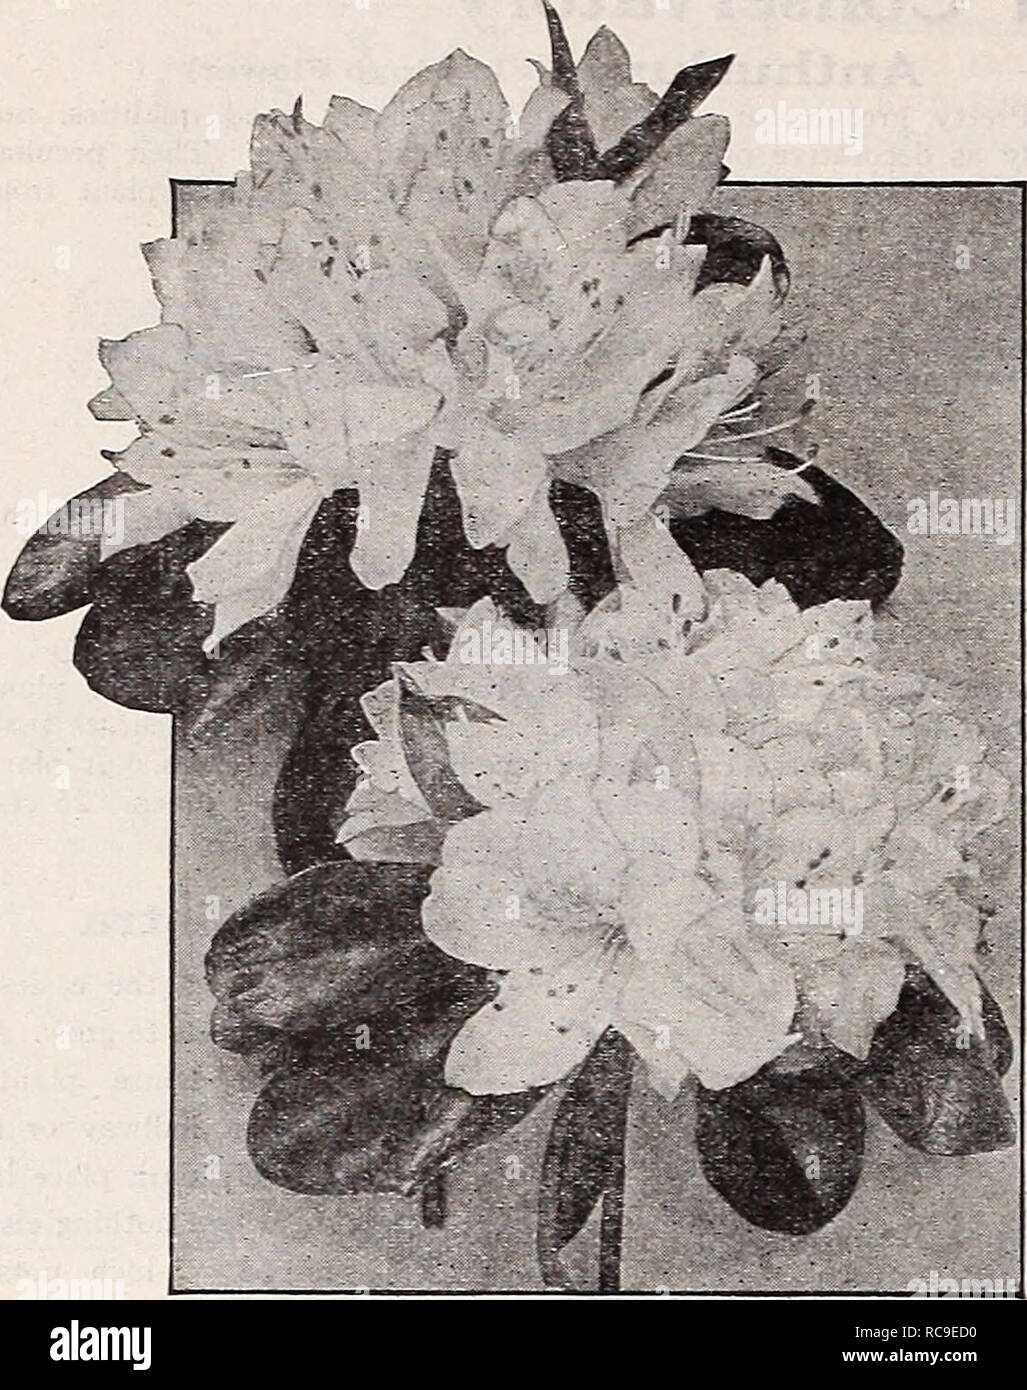 . Dreer's autumn catalogue. Flowers Seeds Catalogs; Bulbs (Plants) Seeds Catalogs; Nurseries (Horticulture) Catalogs; Gardening Equipment and supplies Catalogs. ^^ Select Flowering and Decorative Plants for House and Conservatory. Azalea Kurume Japanese Kurume Azaleas These are most valuable additions to our limited list of winter flowering plants. We offer six choice varieties. Cattleya. A delicately lilac-tinted white, shading to a mauve pink at edges. Semi-double. Cliristinas Cheer. This name was suggested by its brilliant coloring, a real Christmas red, semi-double. Coral Bells. Not a very Stock Photo